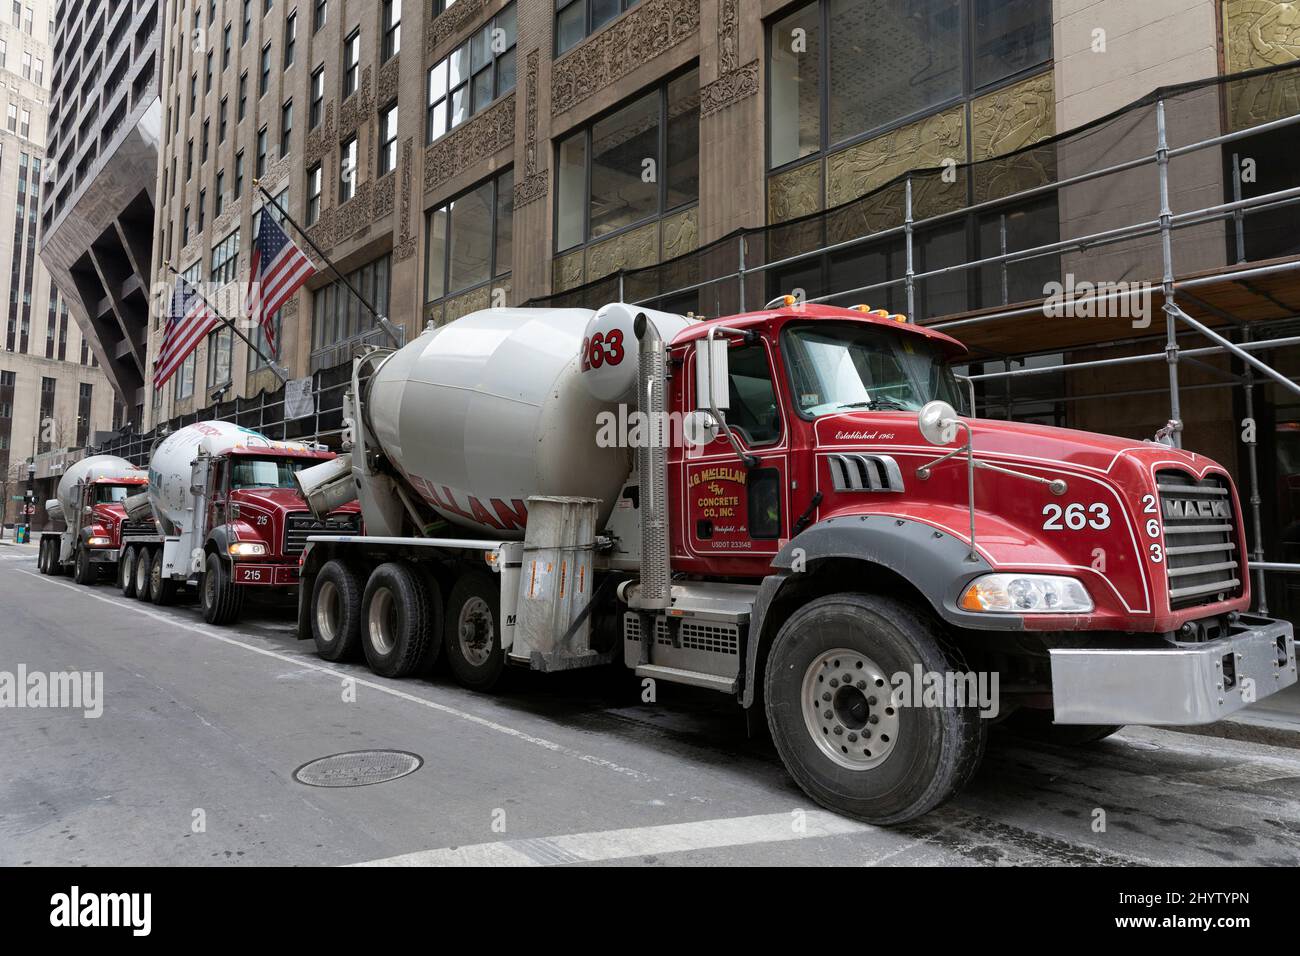 Cement trucks lined up at a construction site Boston Massachusetts Stock Photo